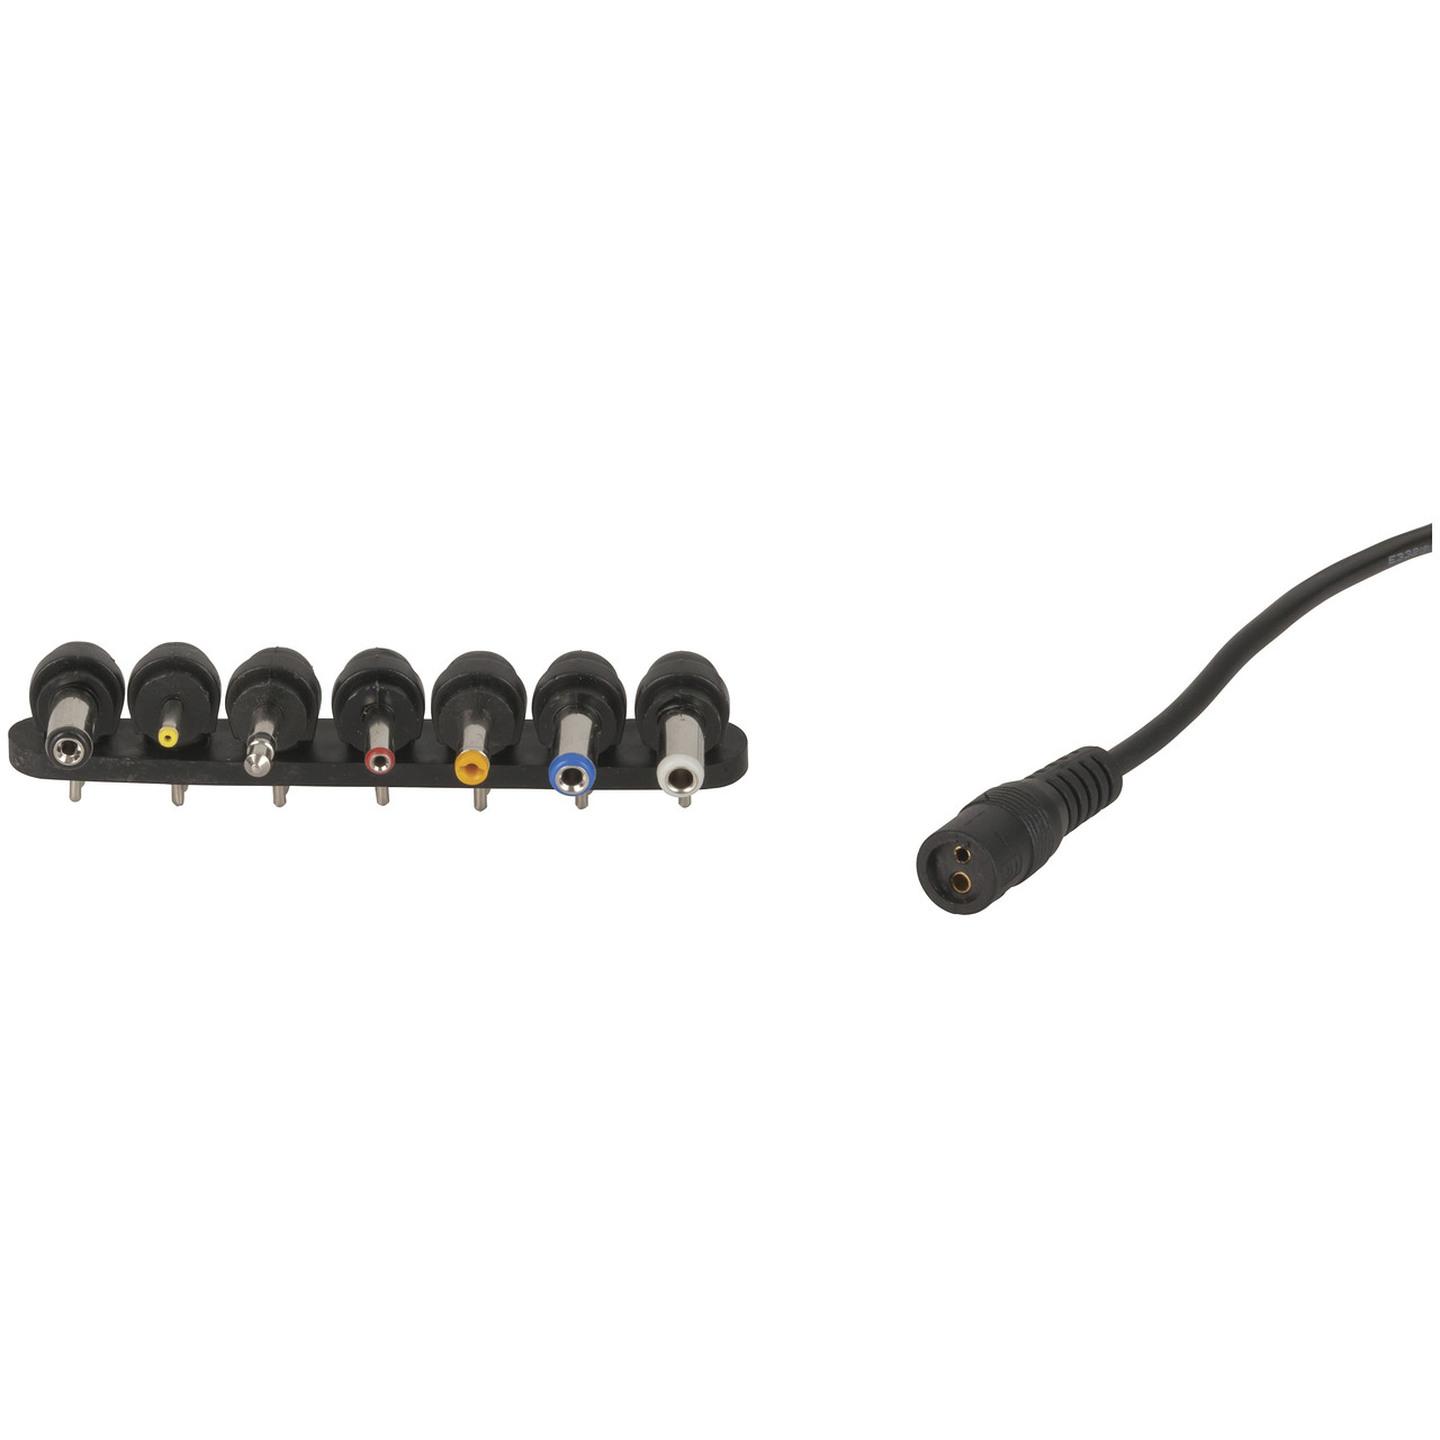 12VAC 1A Unregulated Power Supply 7 x DC Style Plugs